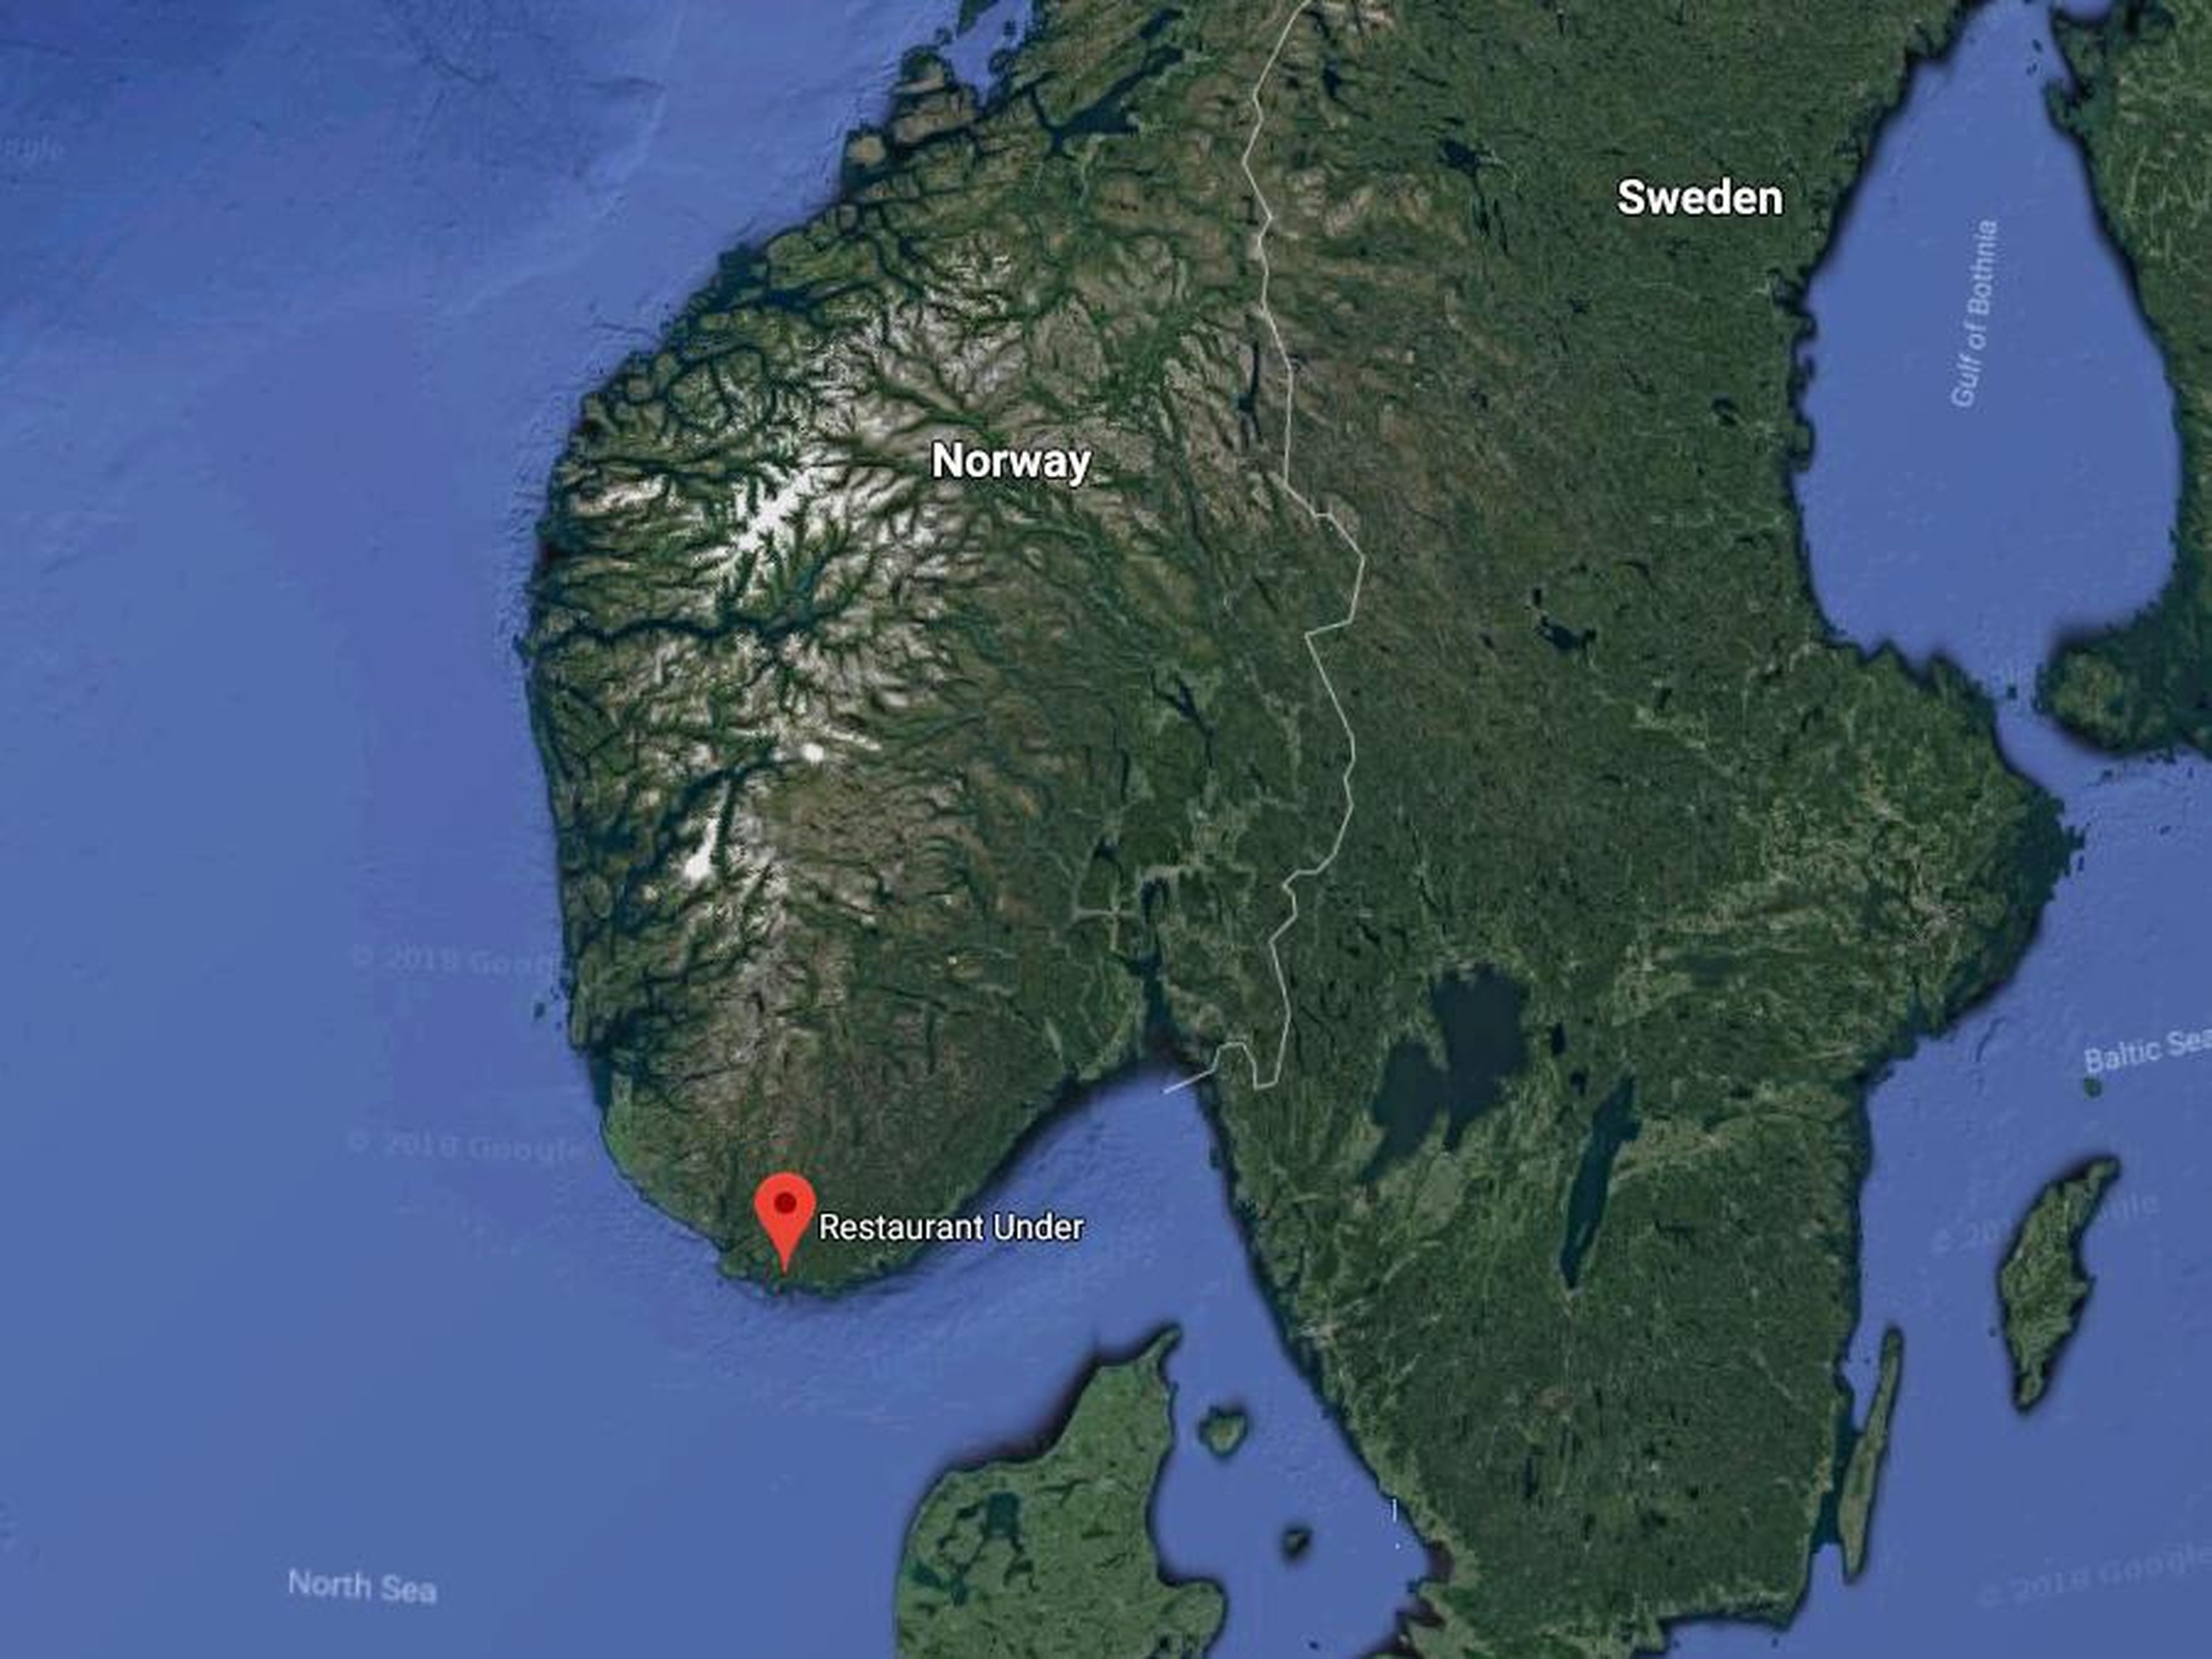 The restaurant is located at the southernmost tip of Norway, in the coastal village of Båly, in the Lindesnes region.